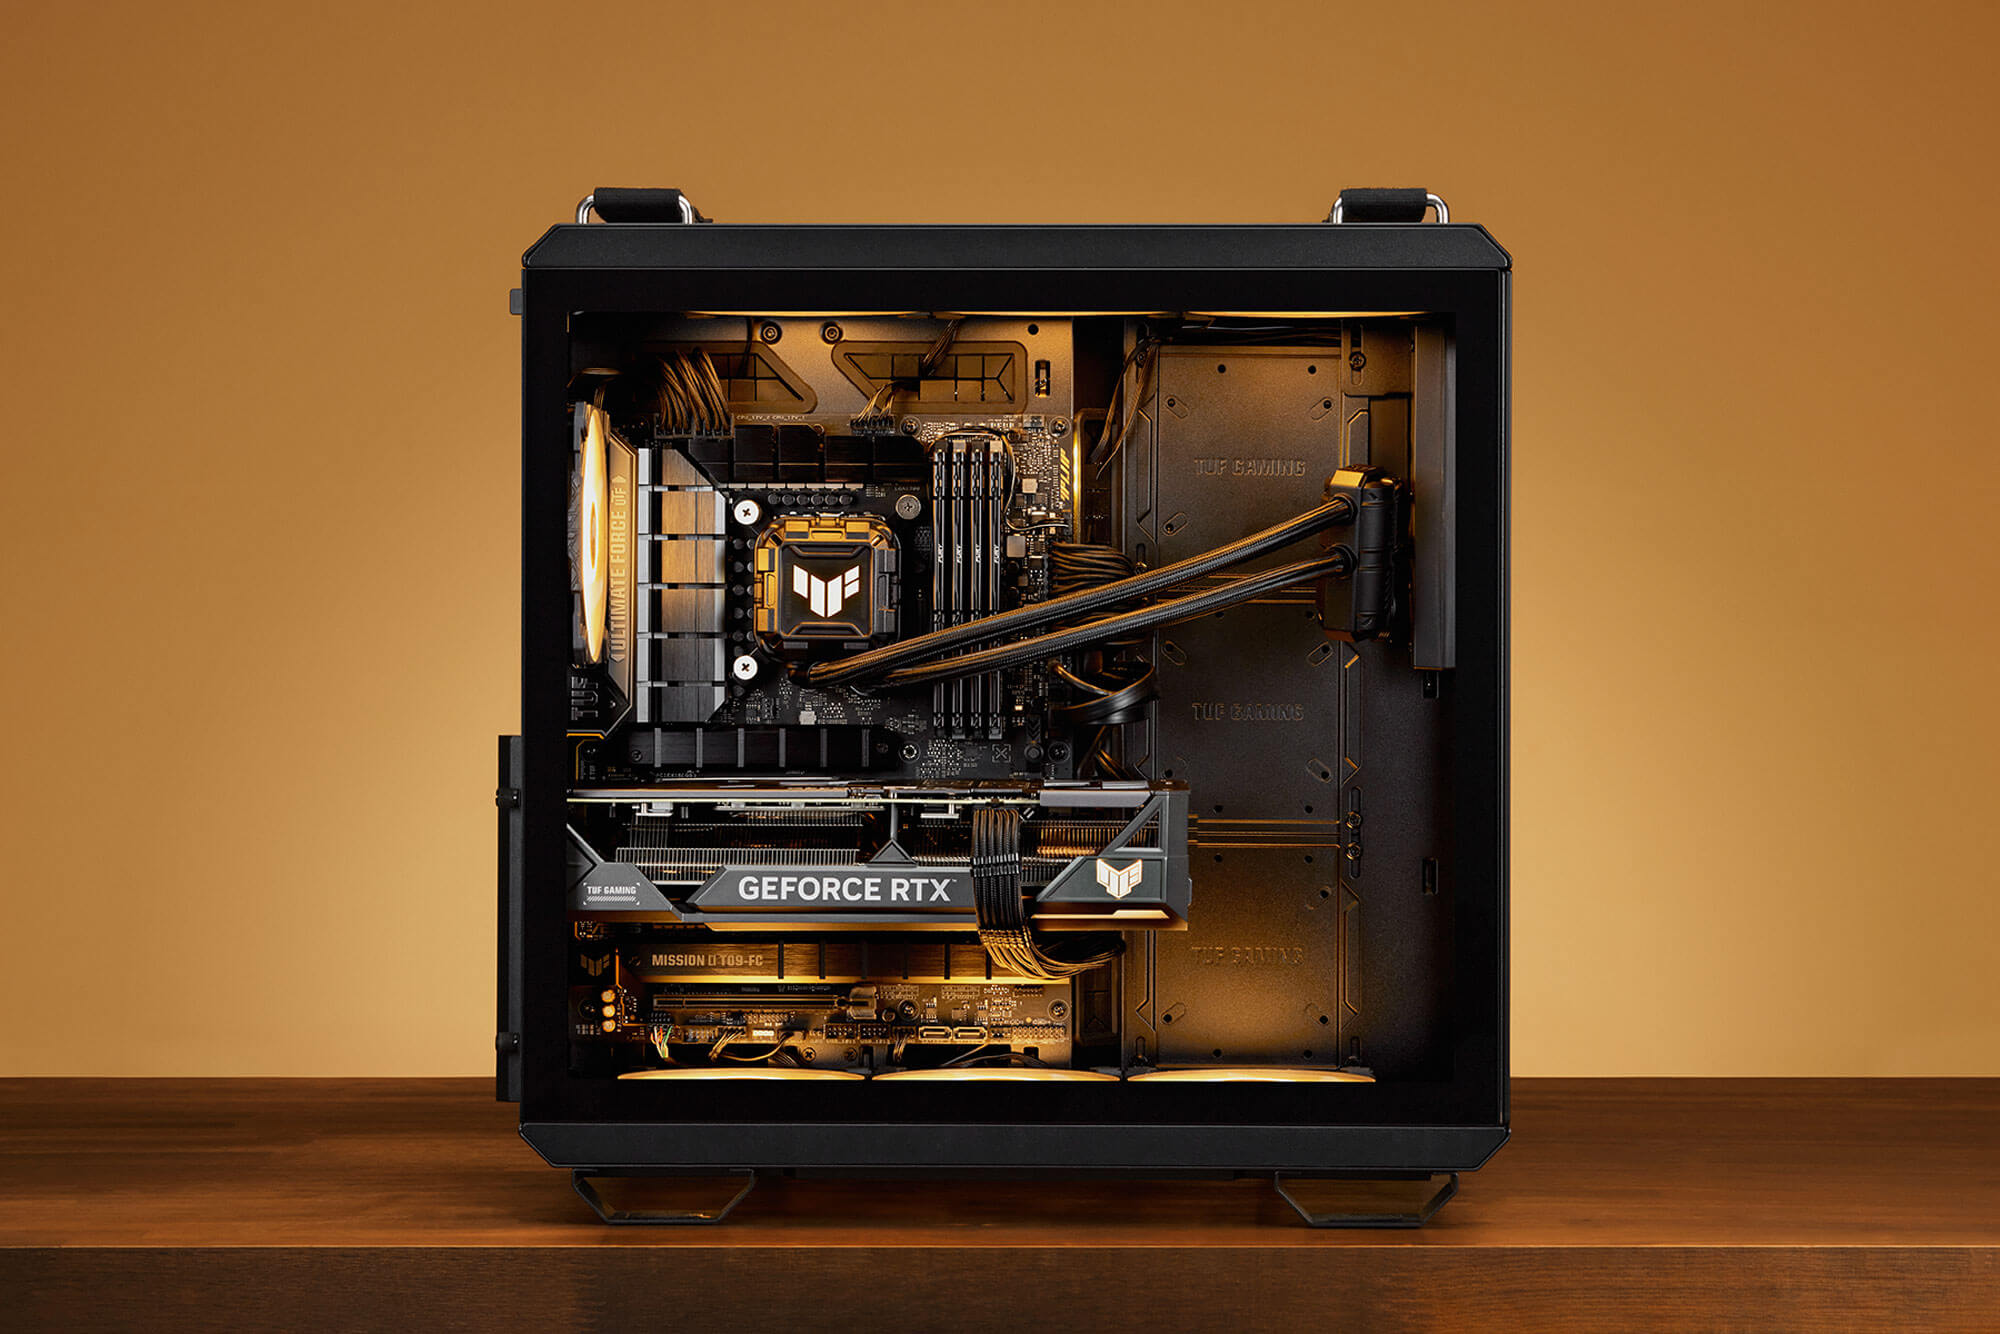 45-degree angle photo of the TUF as Nails PC build.